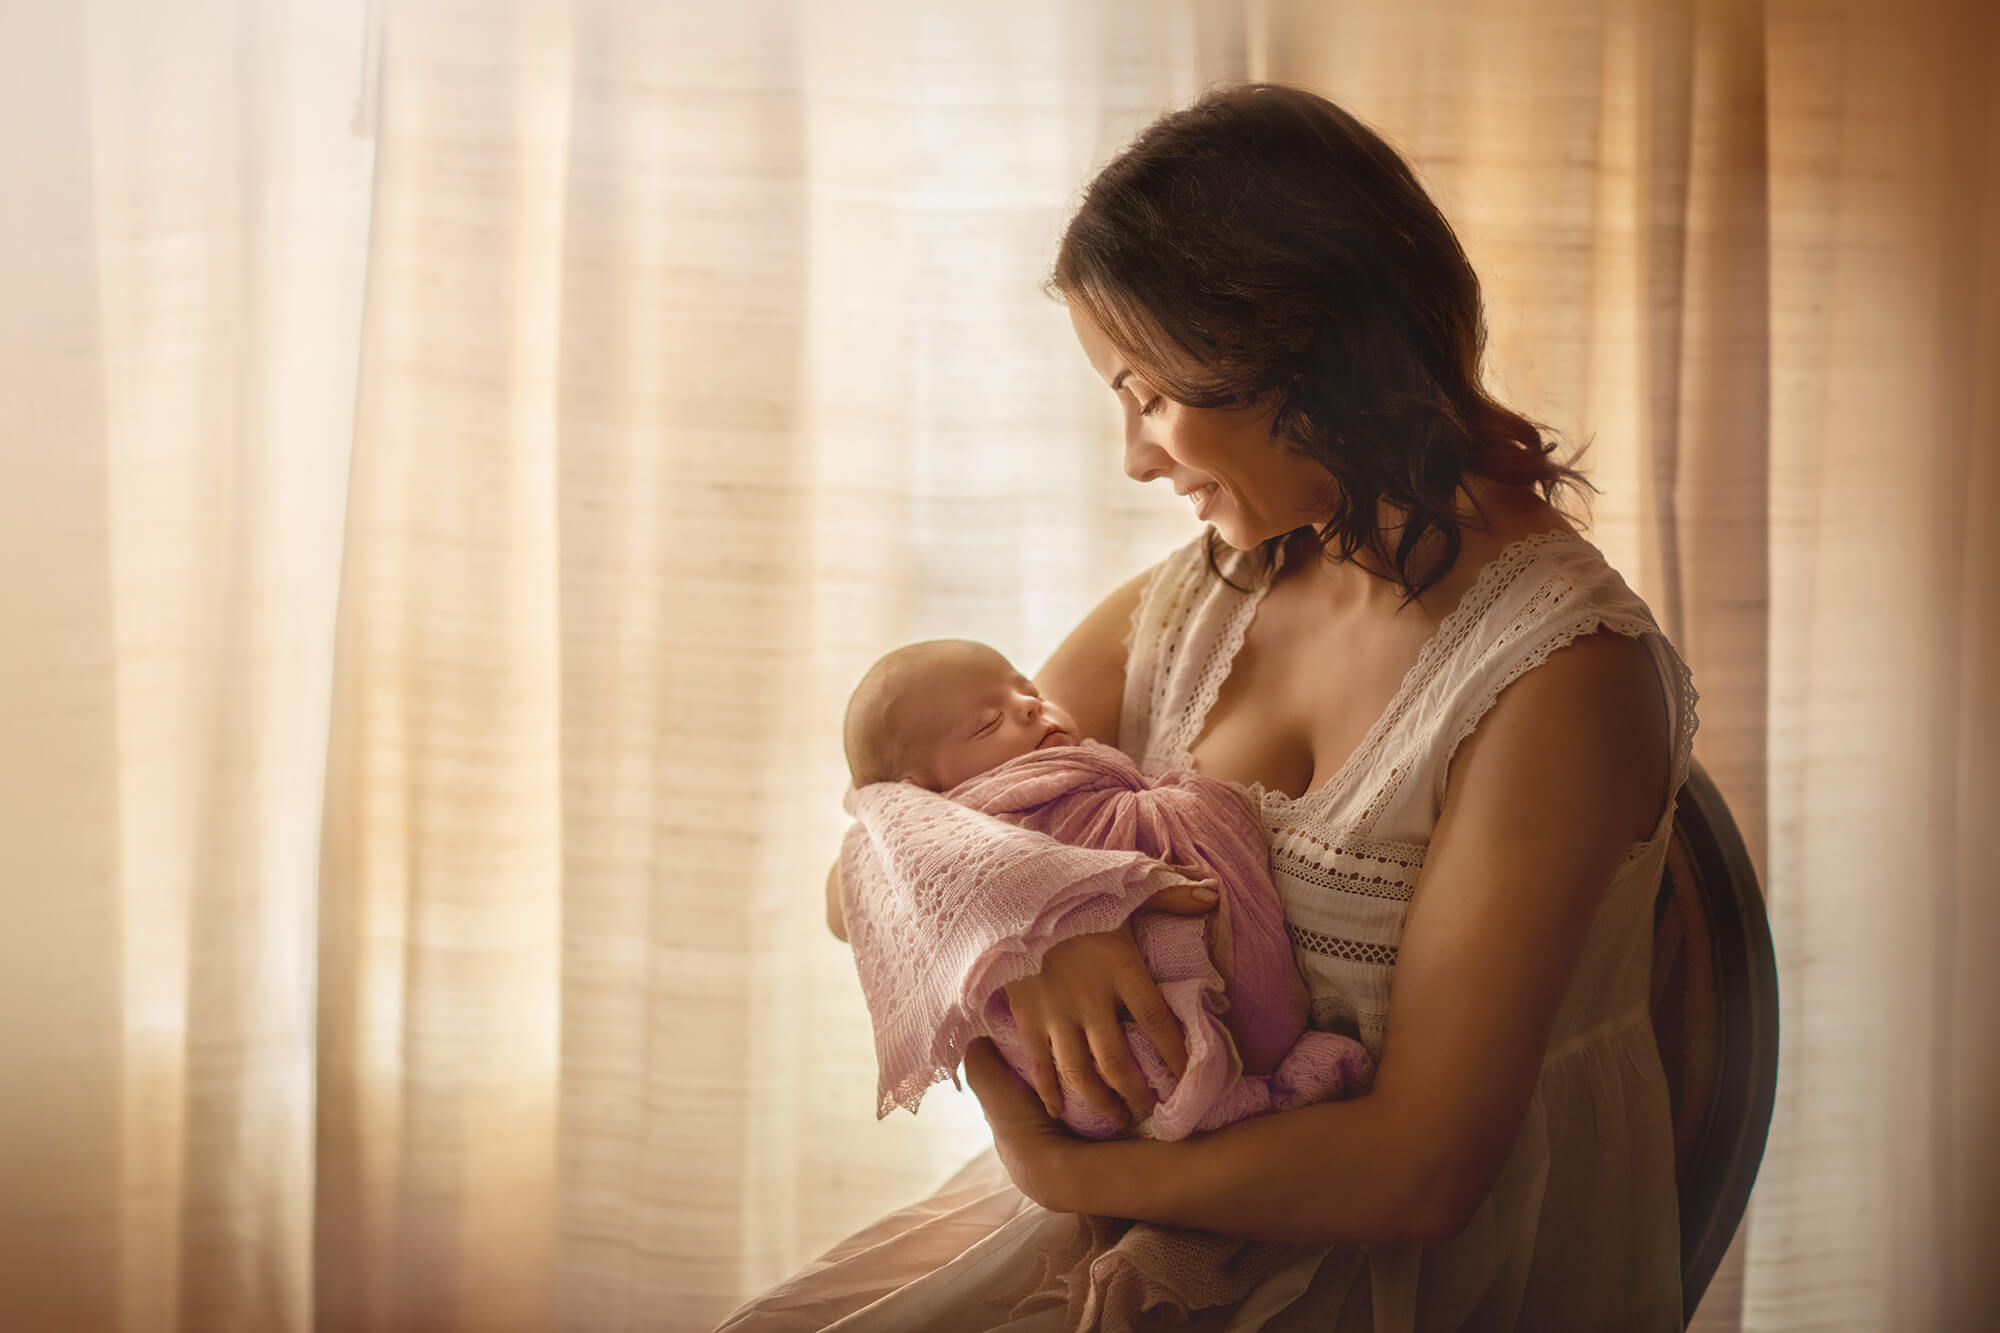 mother and newborn baby photography